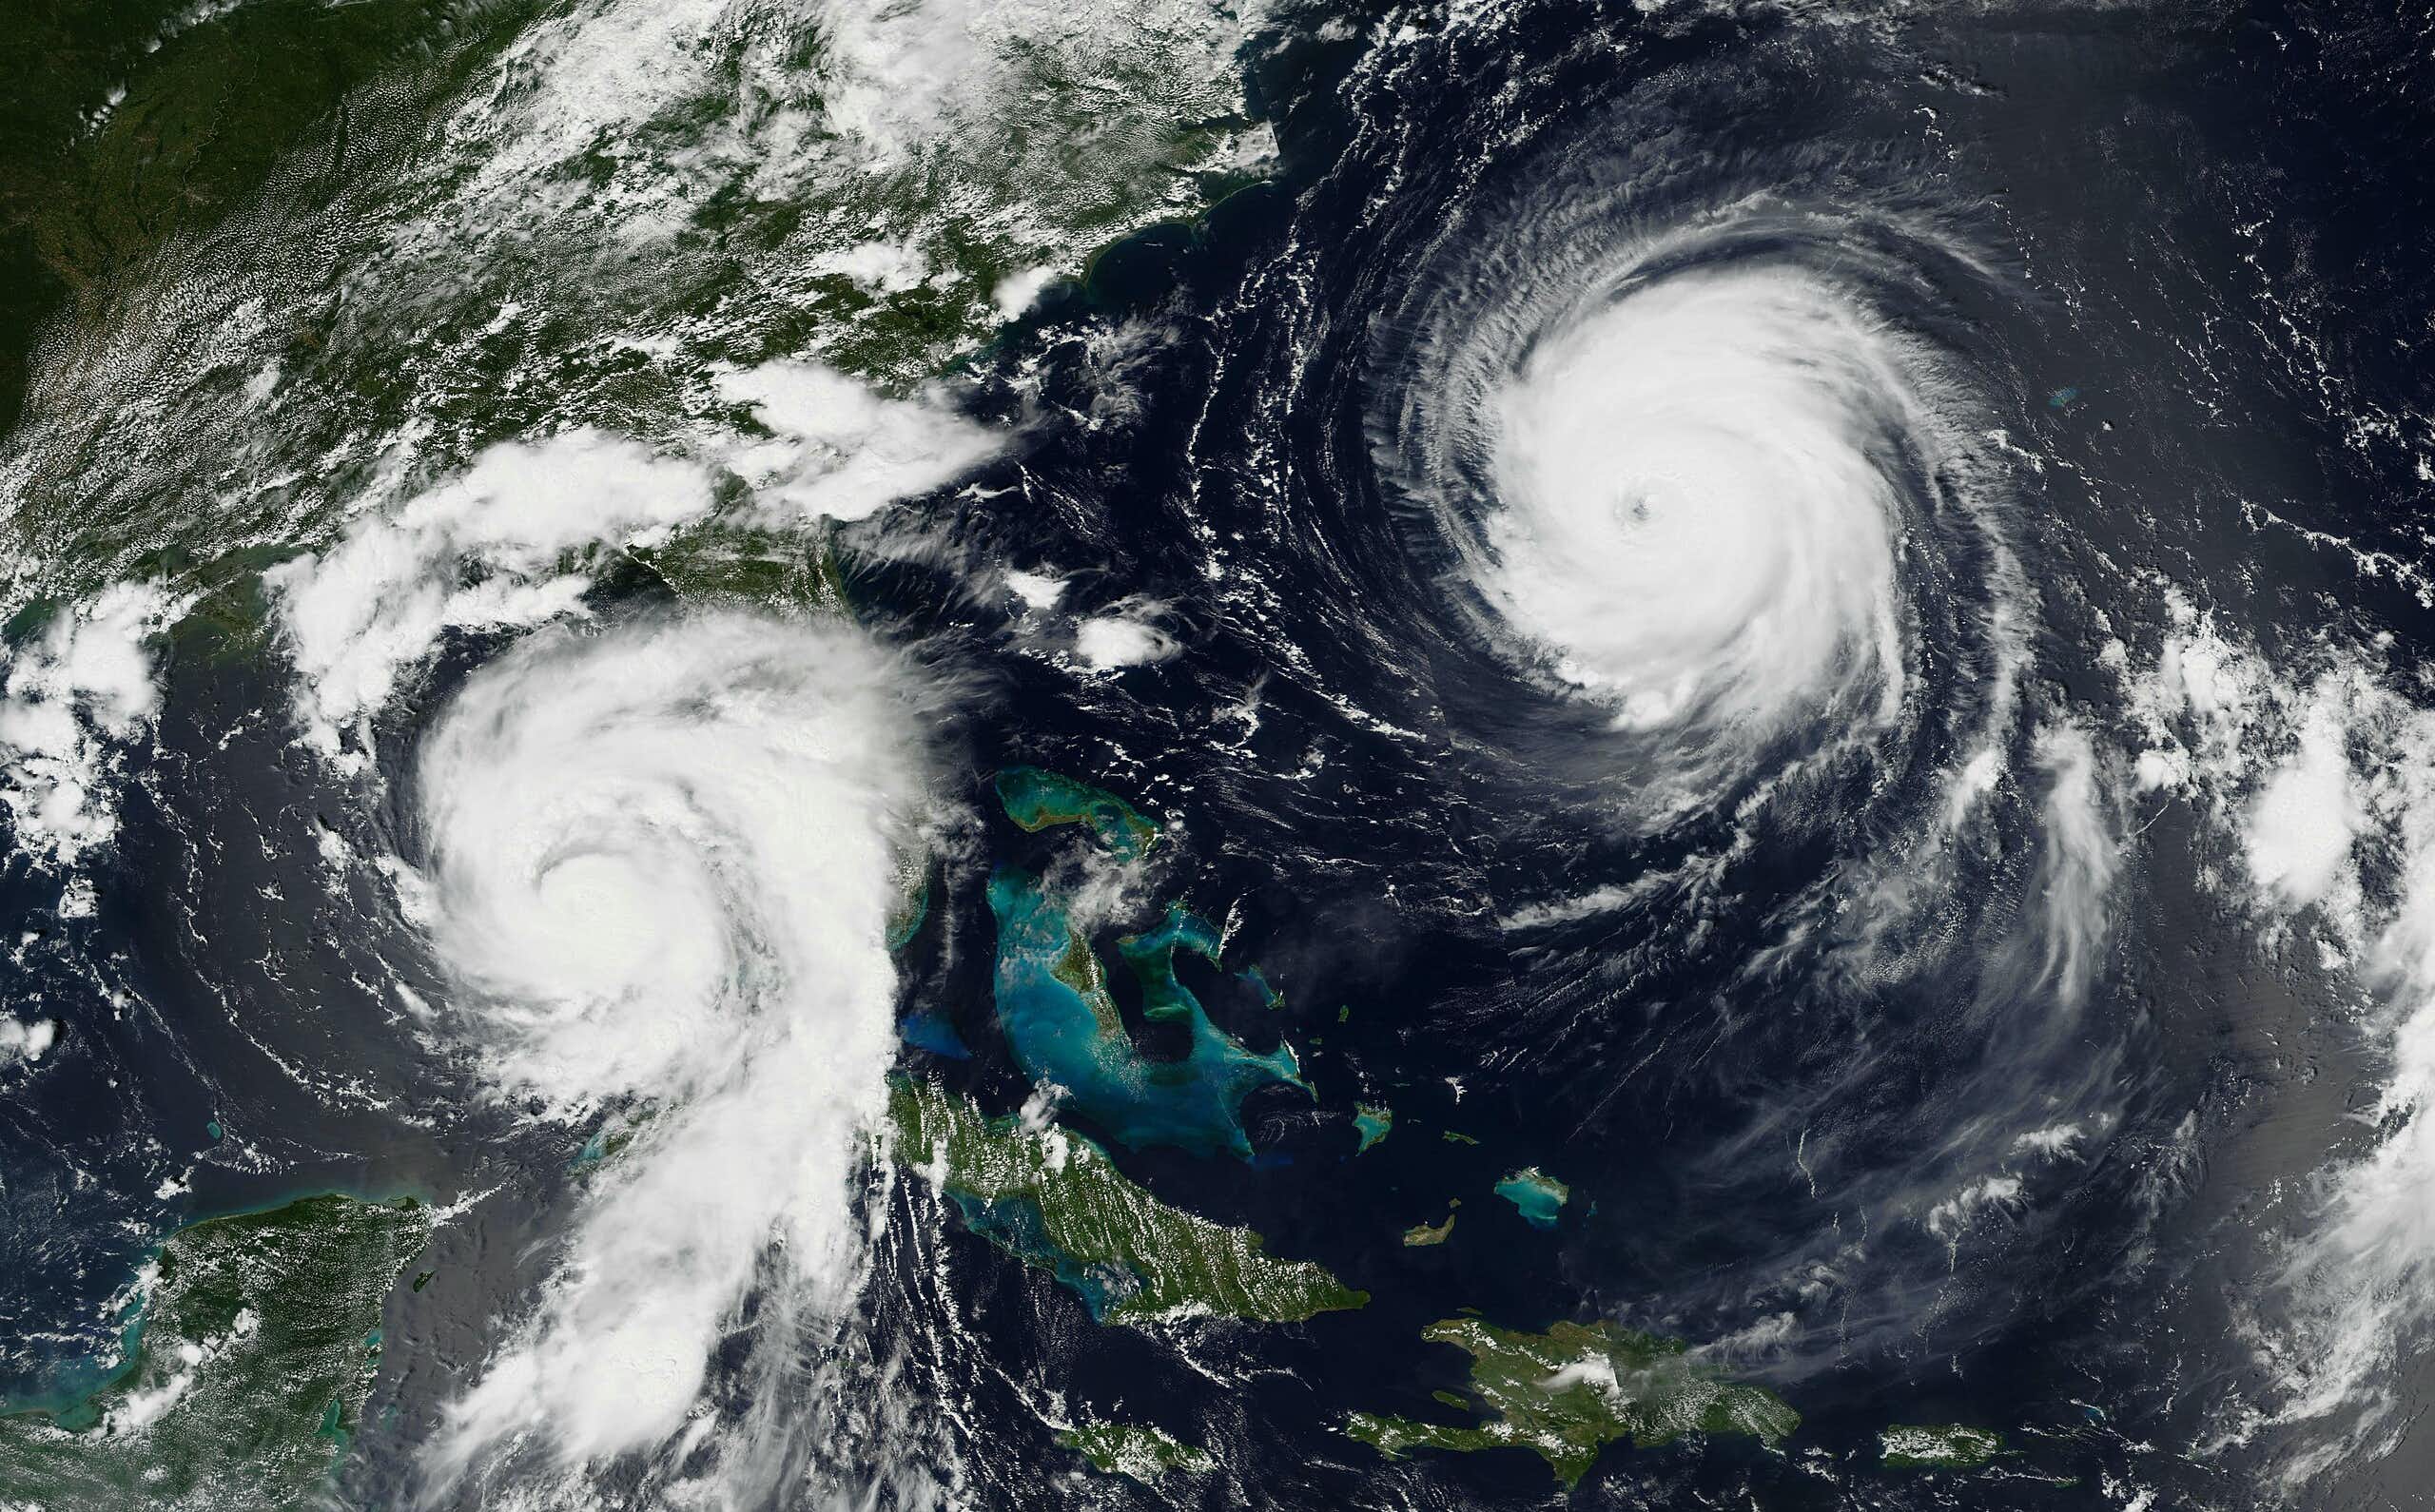 Two hurricanes. Franklin, more powerful at that point, has a clear eye wall.